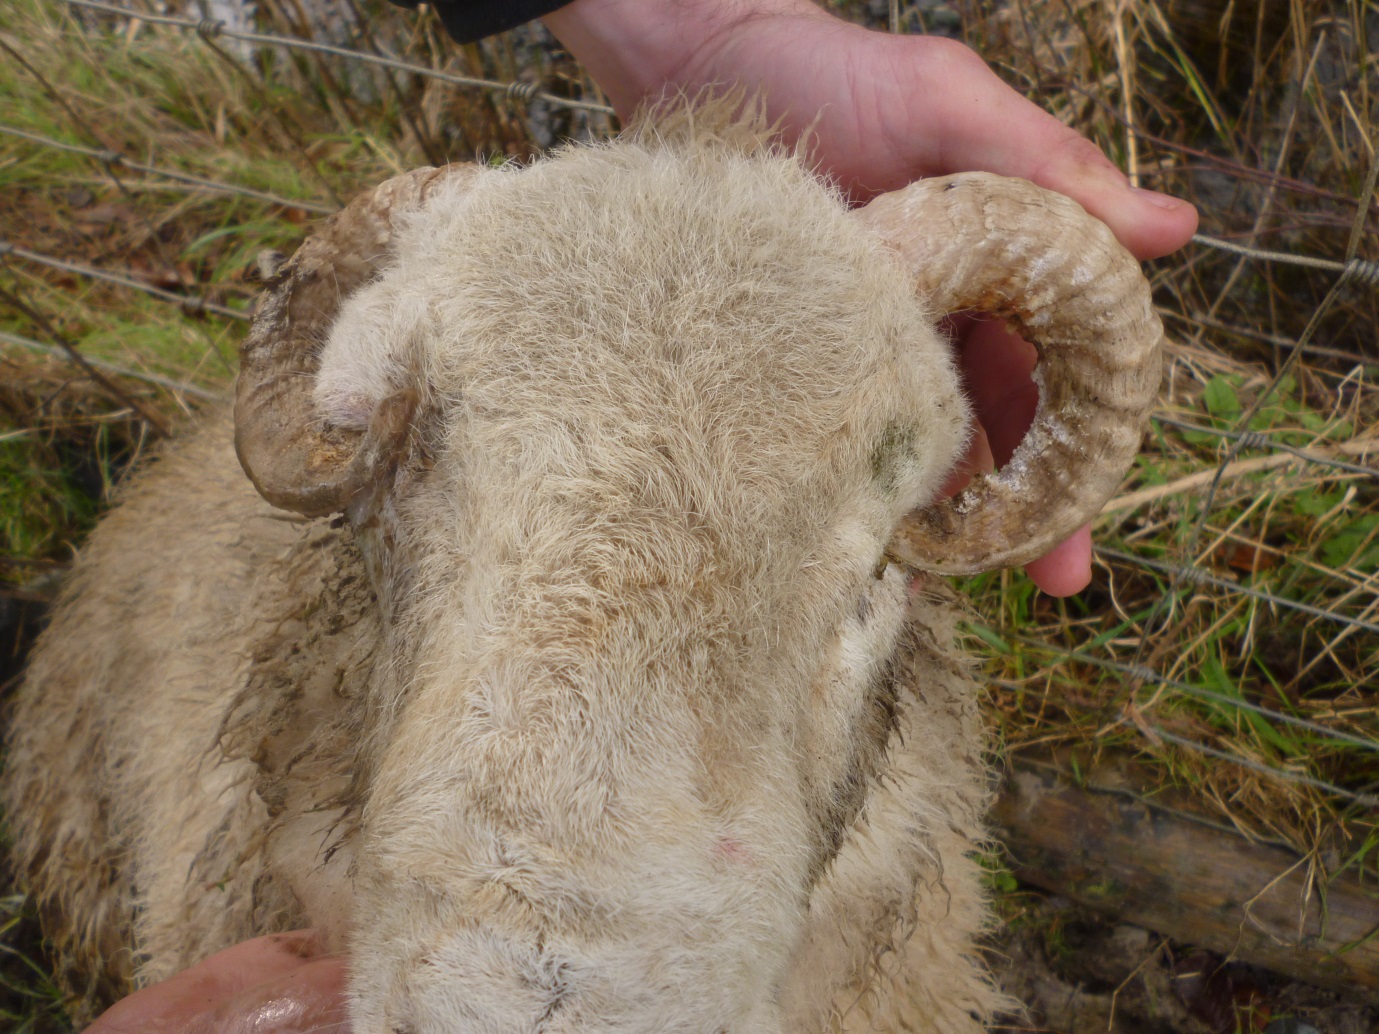 Ram lamb: Caused unnecessary suffering due to overgrown horns affecting both eyes